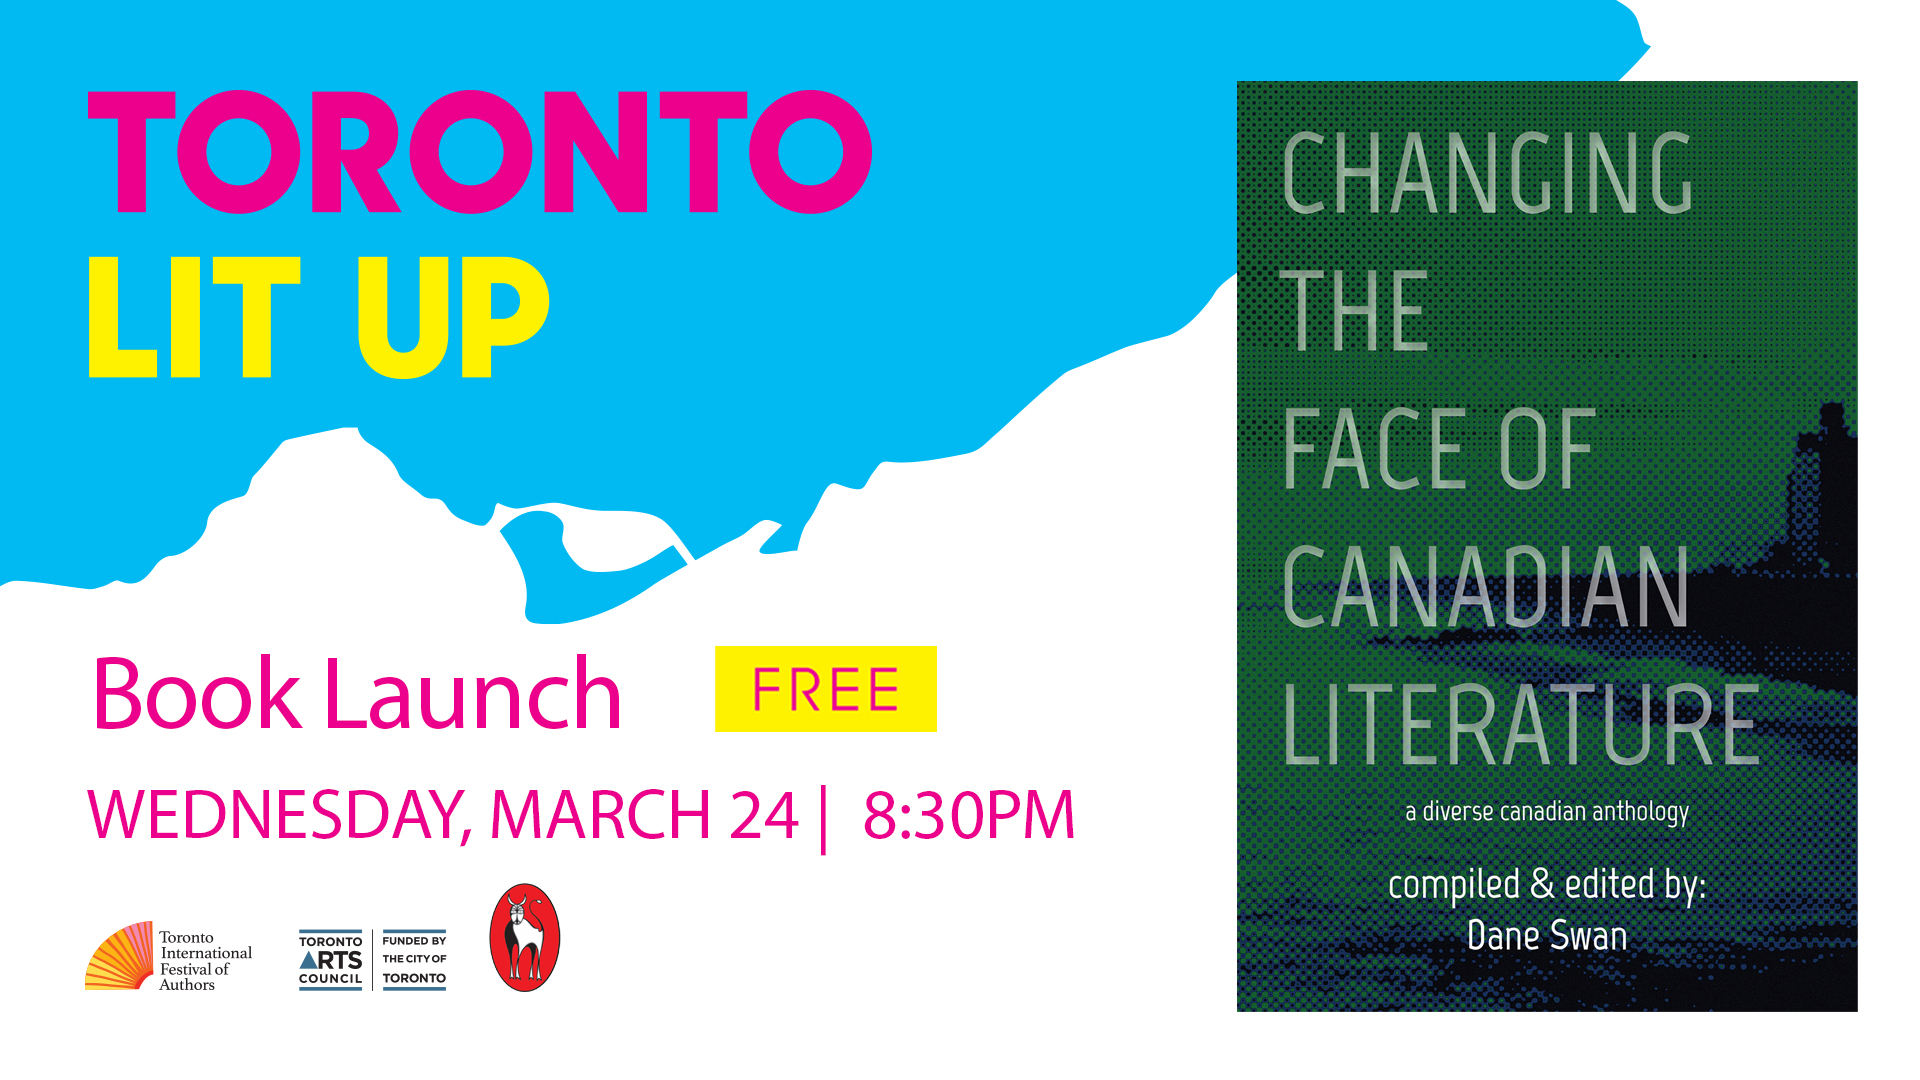 Toronto Lit Up Banner with Changing the Face of Canadian Literature book cover and "Book Launch Free Wednesday March 24 8:30pm". Includes TIFA, Toronto Arts Council and Guernica Editions logos.